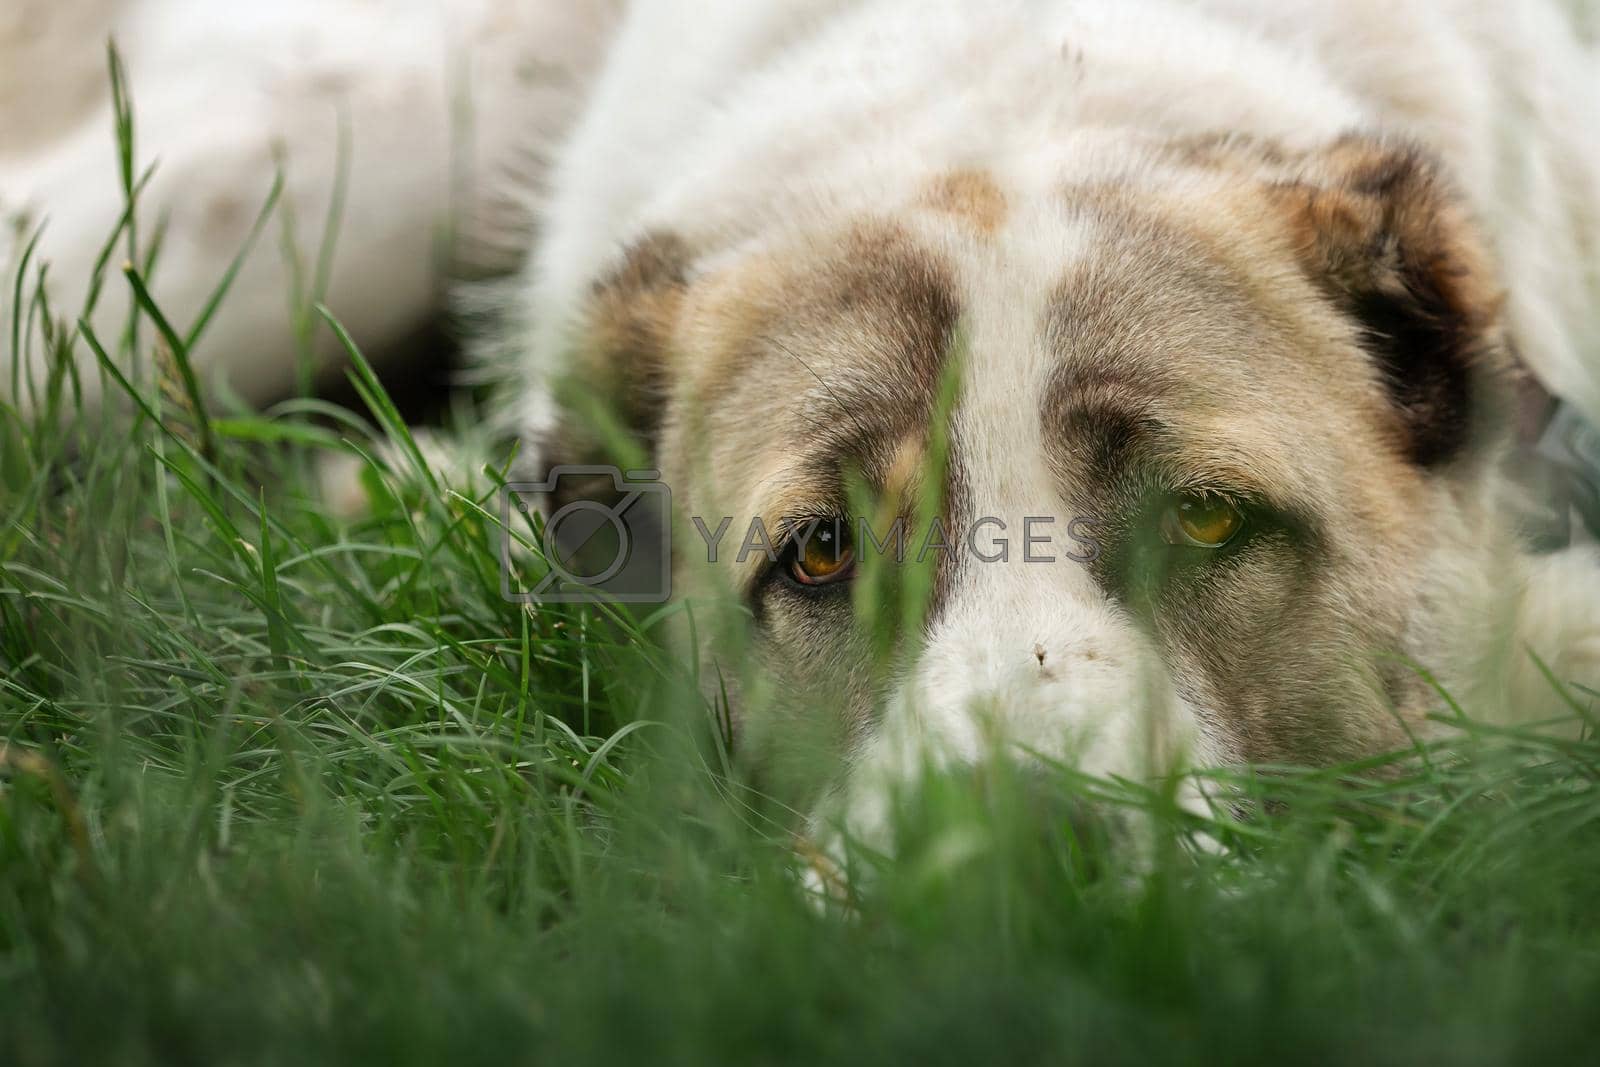 Royalty free image of Thoughtful Asian Shepherd dog and mosquito on his nose by Lincikas